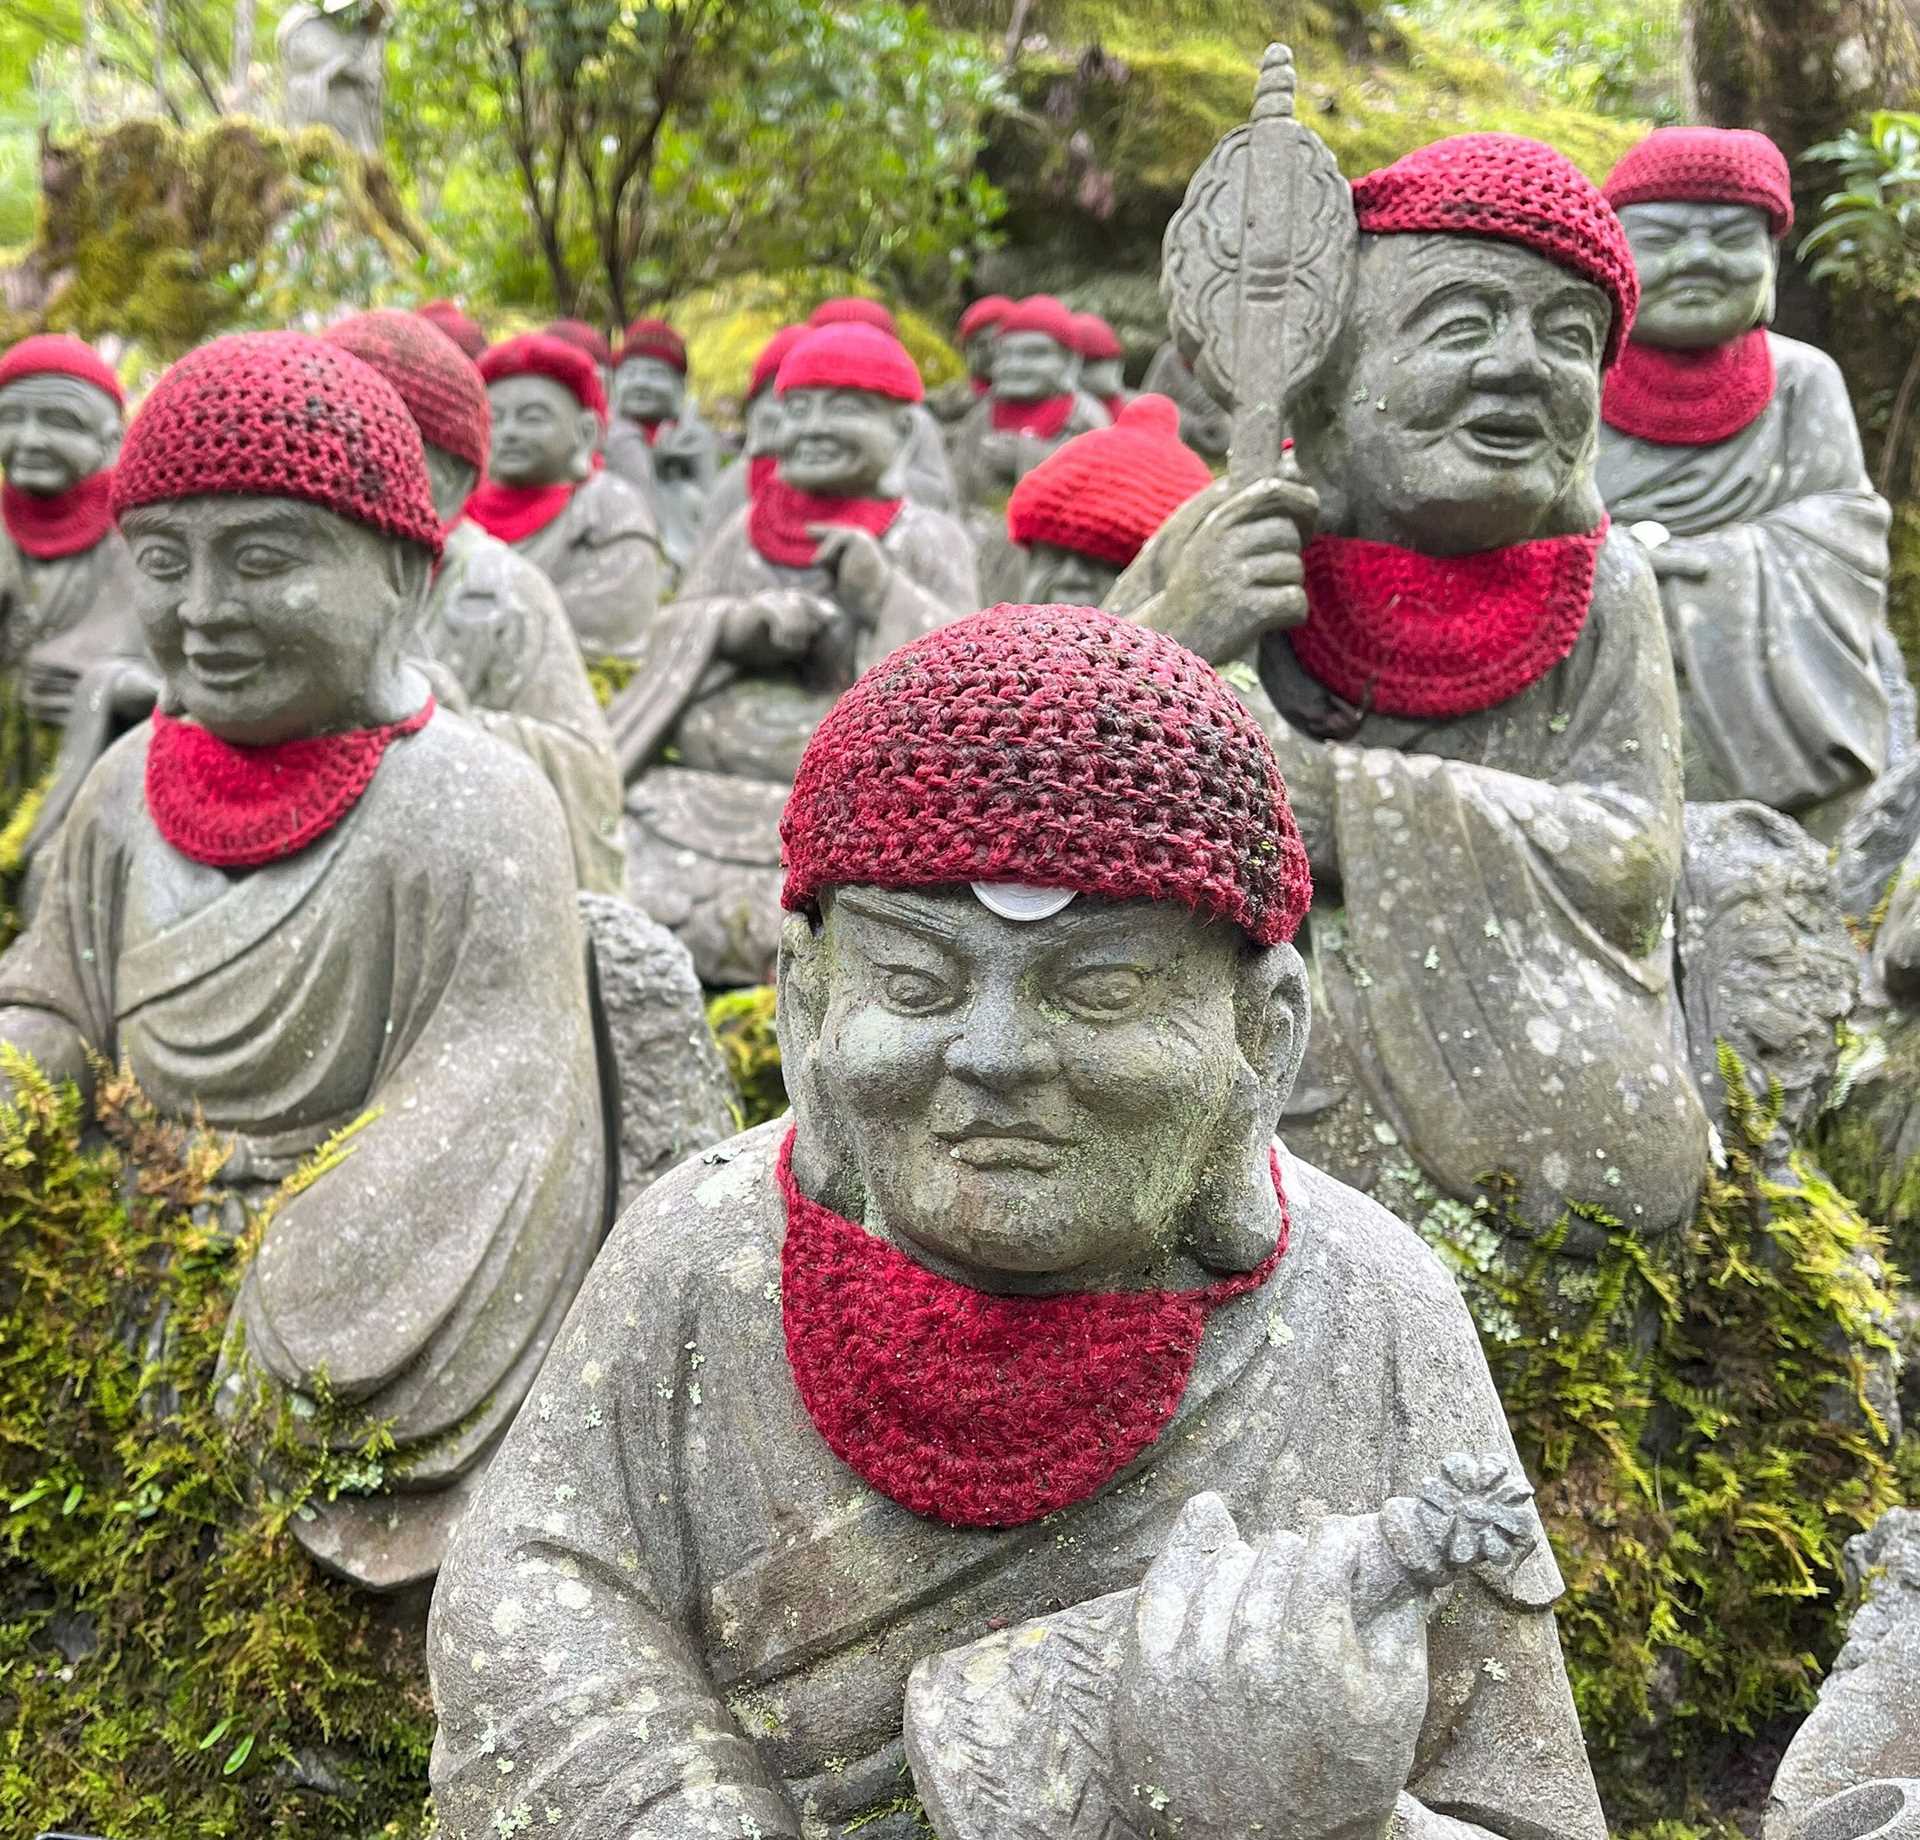 small, round gray statues in pink hats